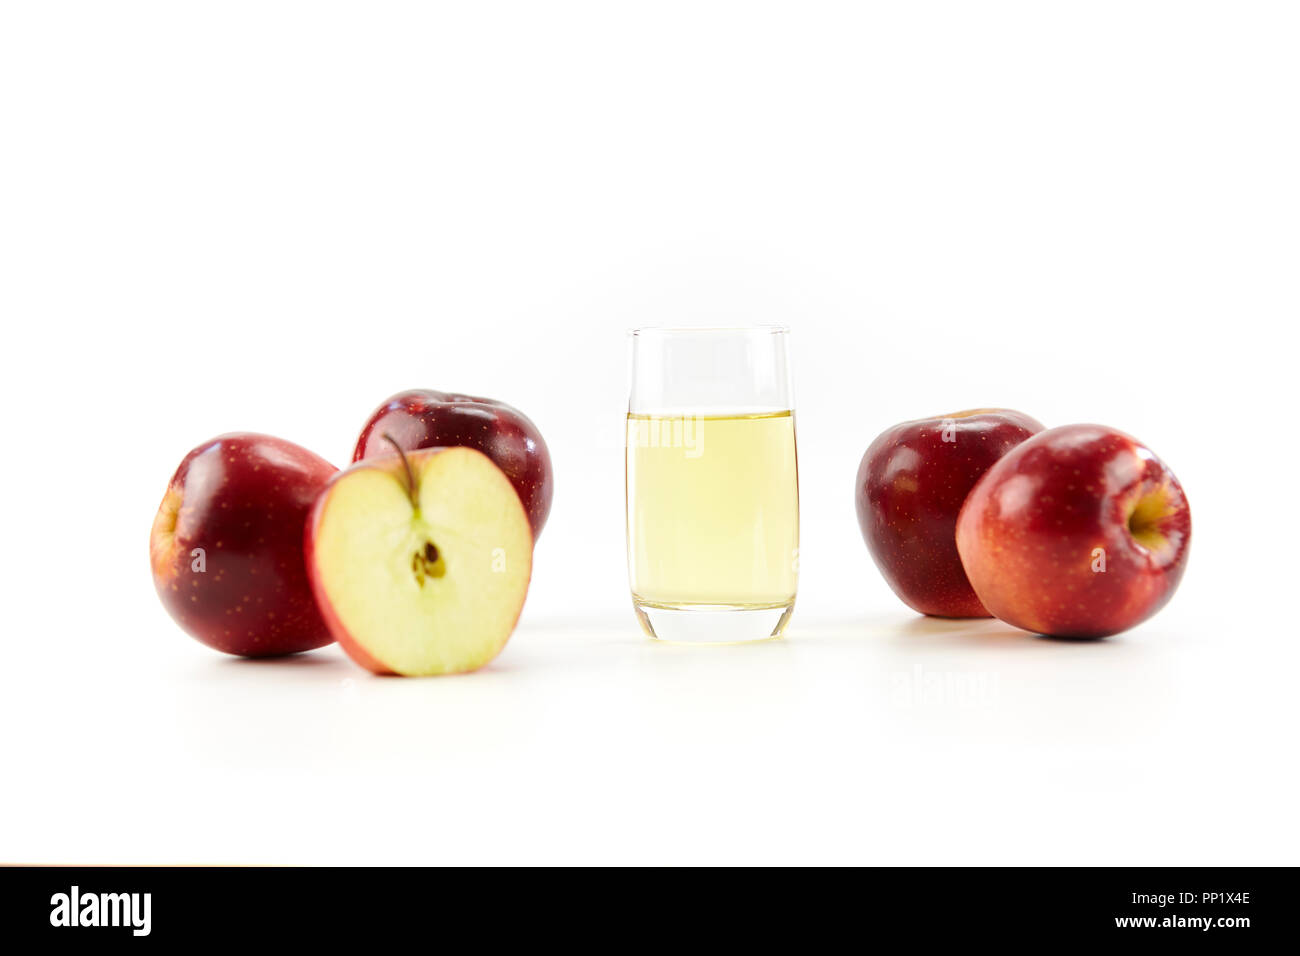 apples whole and half and a glass of apple juice isolated on white background. Stock Photo